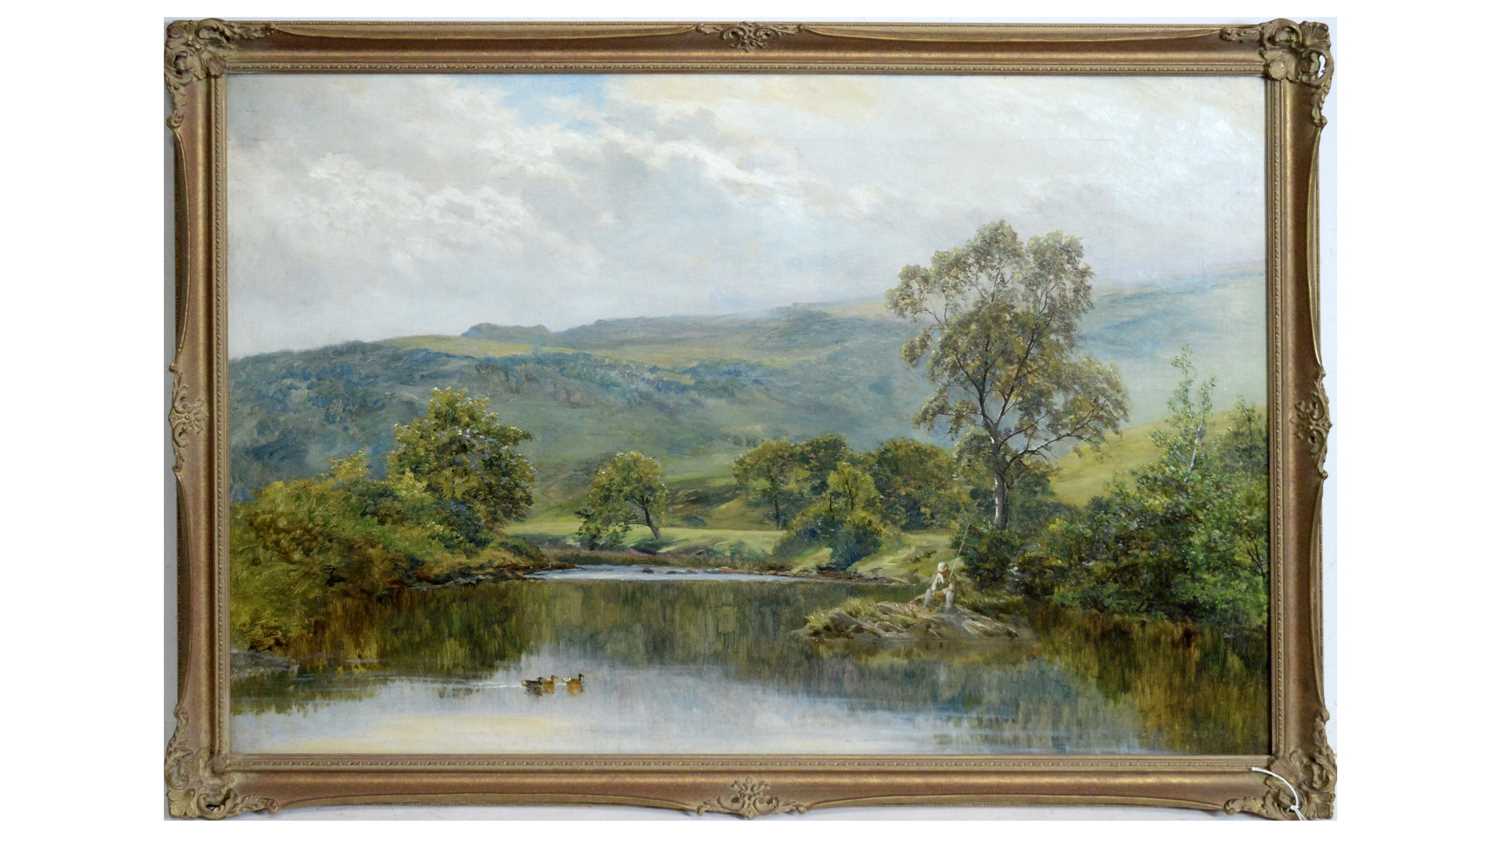 Lot 688 - Manner of Francis "Frank" Thomas Carter - A Quiet Fishing Spot | oil